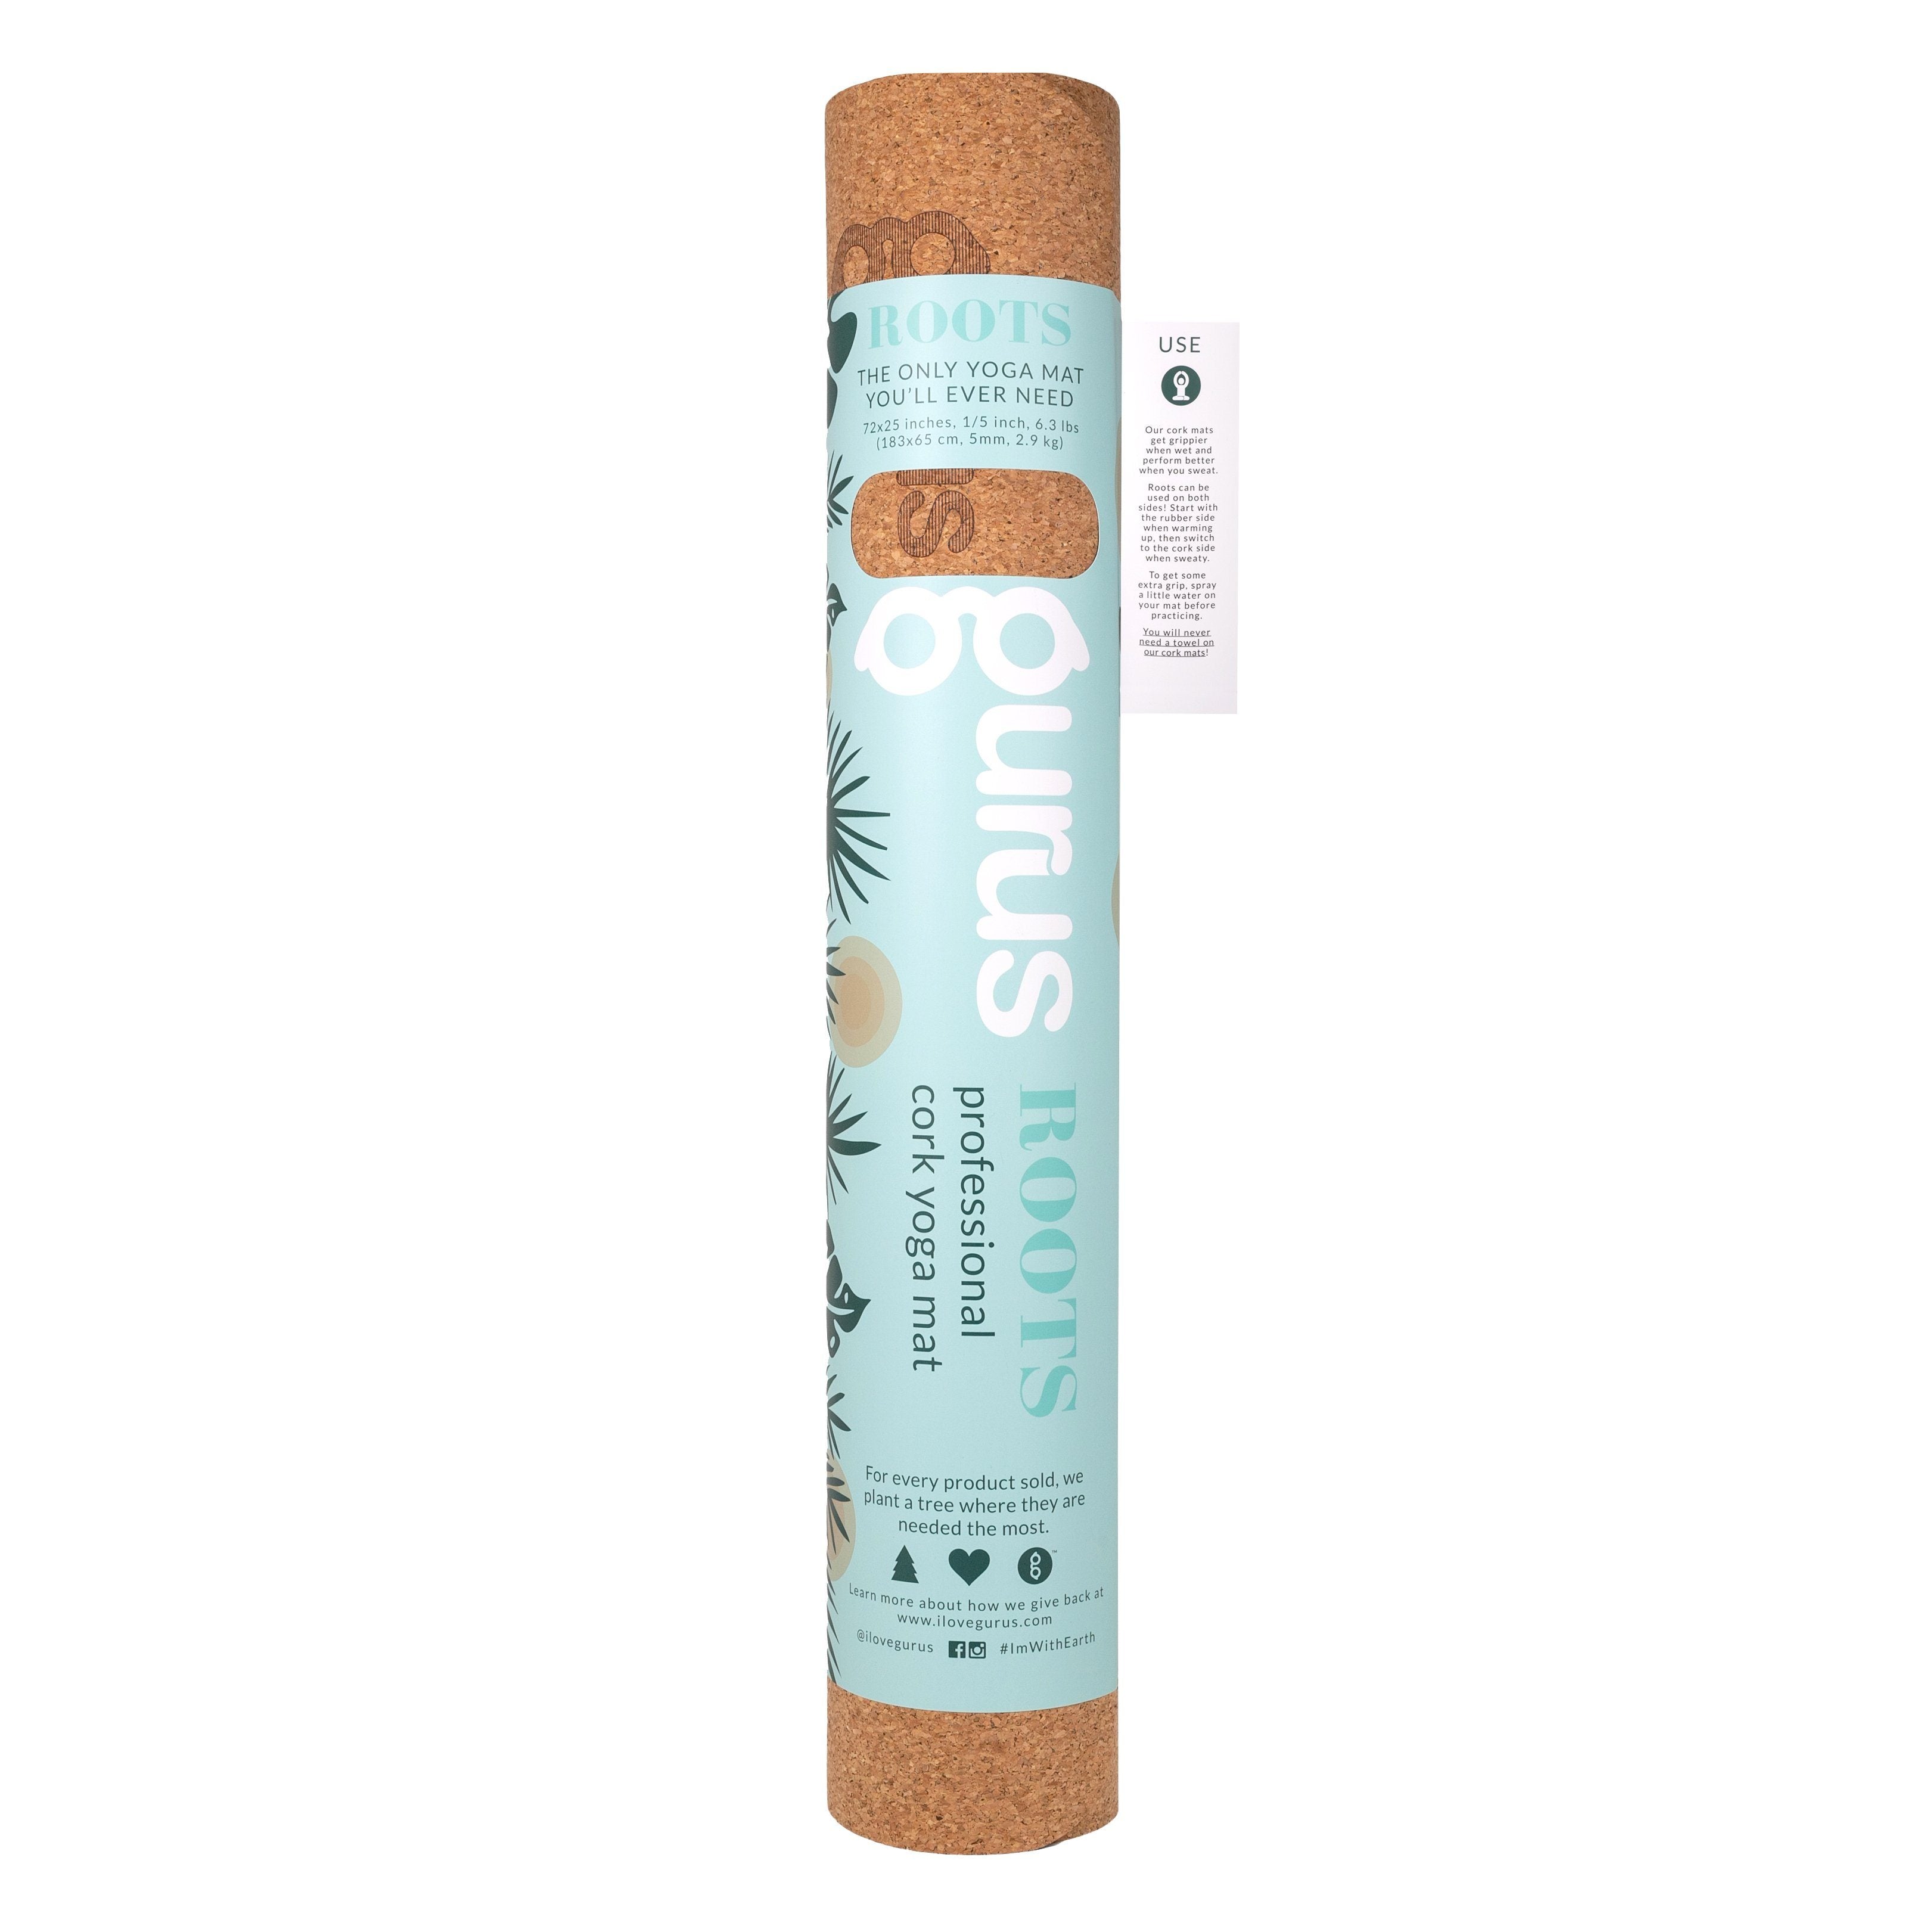 Roots Cork Yoga Mat - sustainability meets function flawlessly